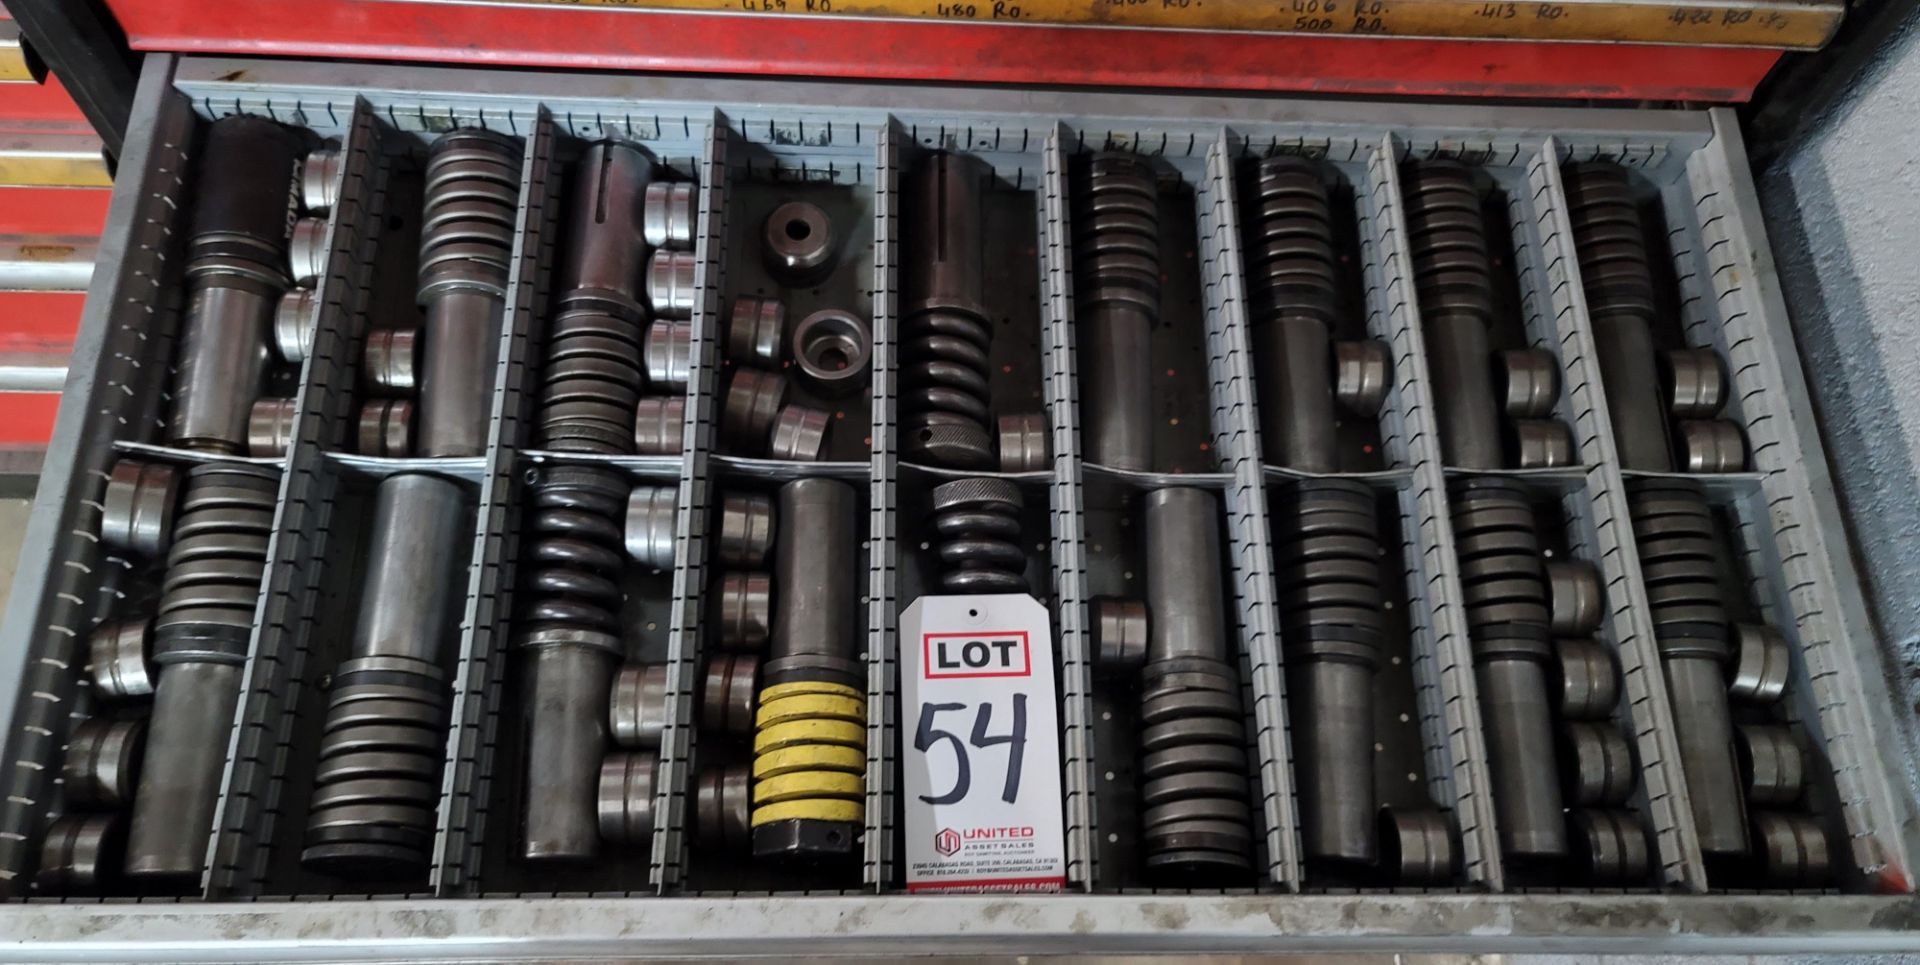 LOT - AMADA PUNCH PRESS TOOLING, MATCHED SETS, (LOCATION: 2174 W 2300 S)